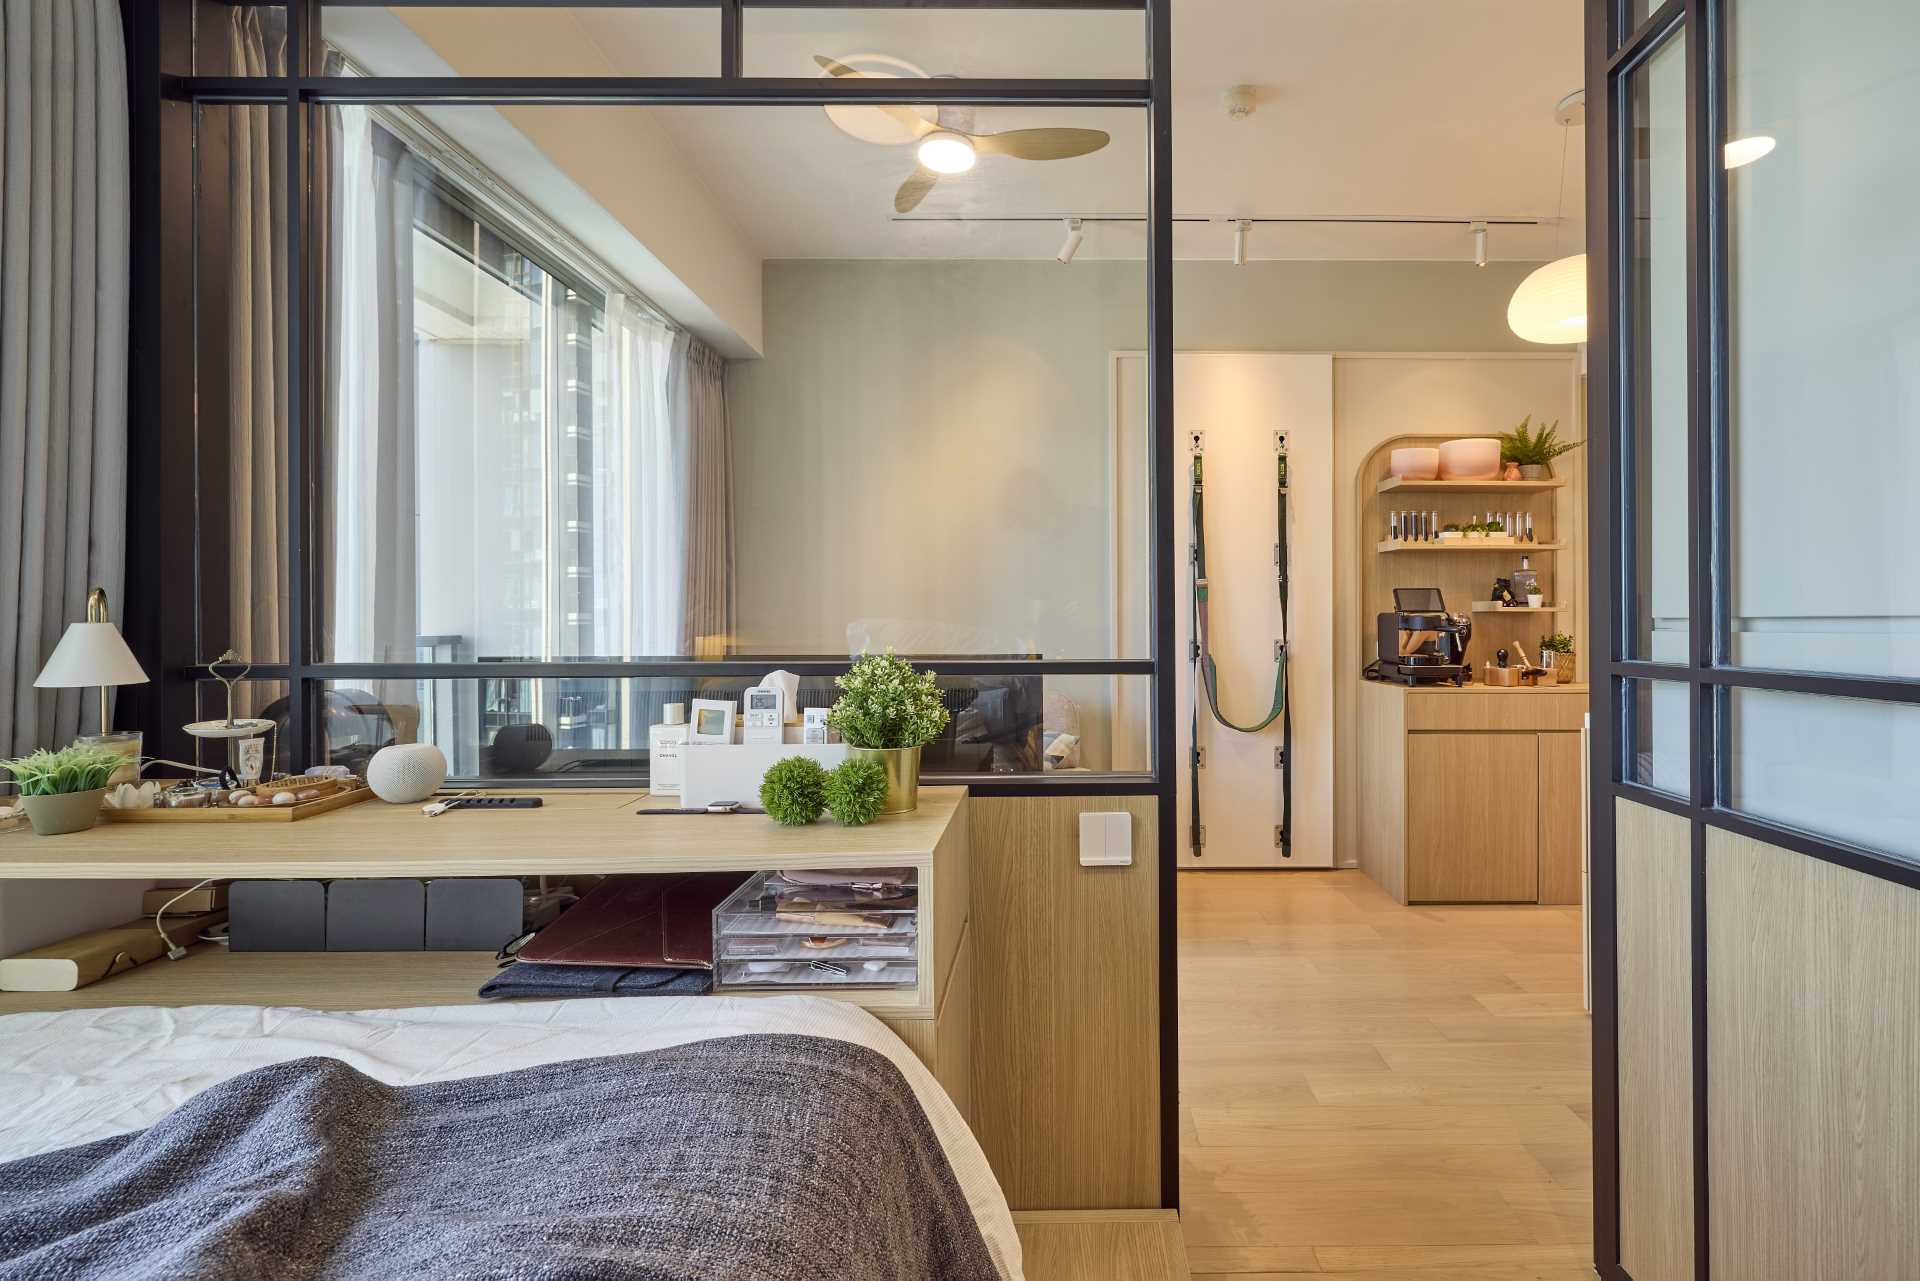 In this small apartment, instead of a standard concrete wall separating the bedroom from the living room, there's a framed panel wall glazed in the upper part, with a wooden lower part. 